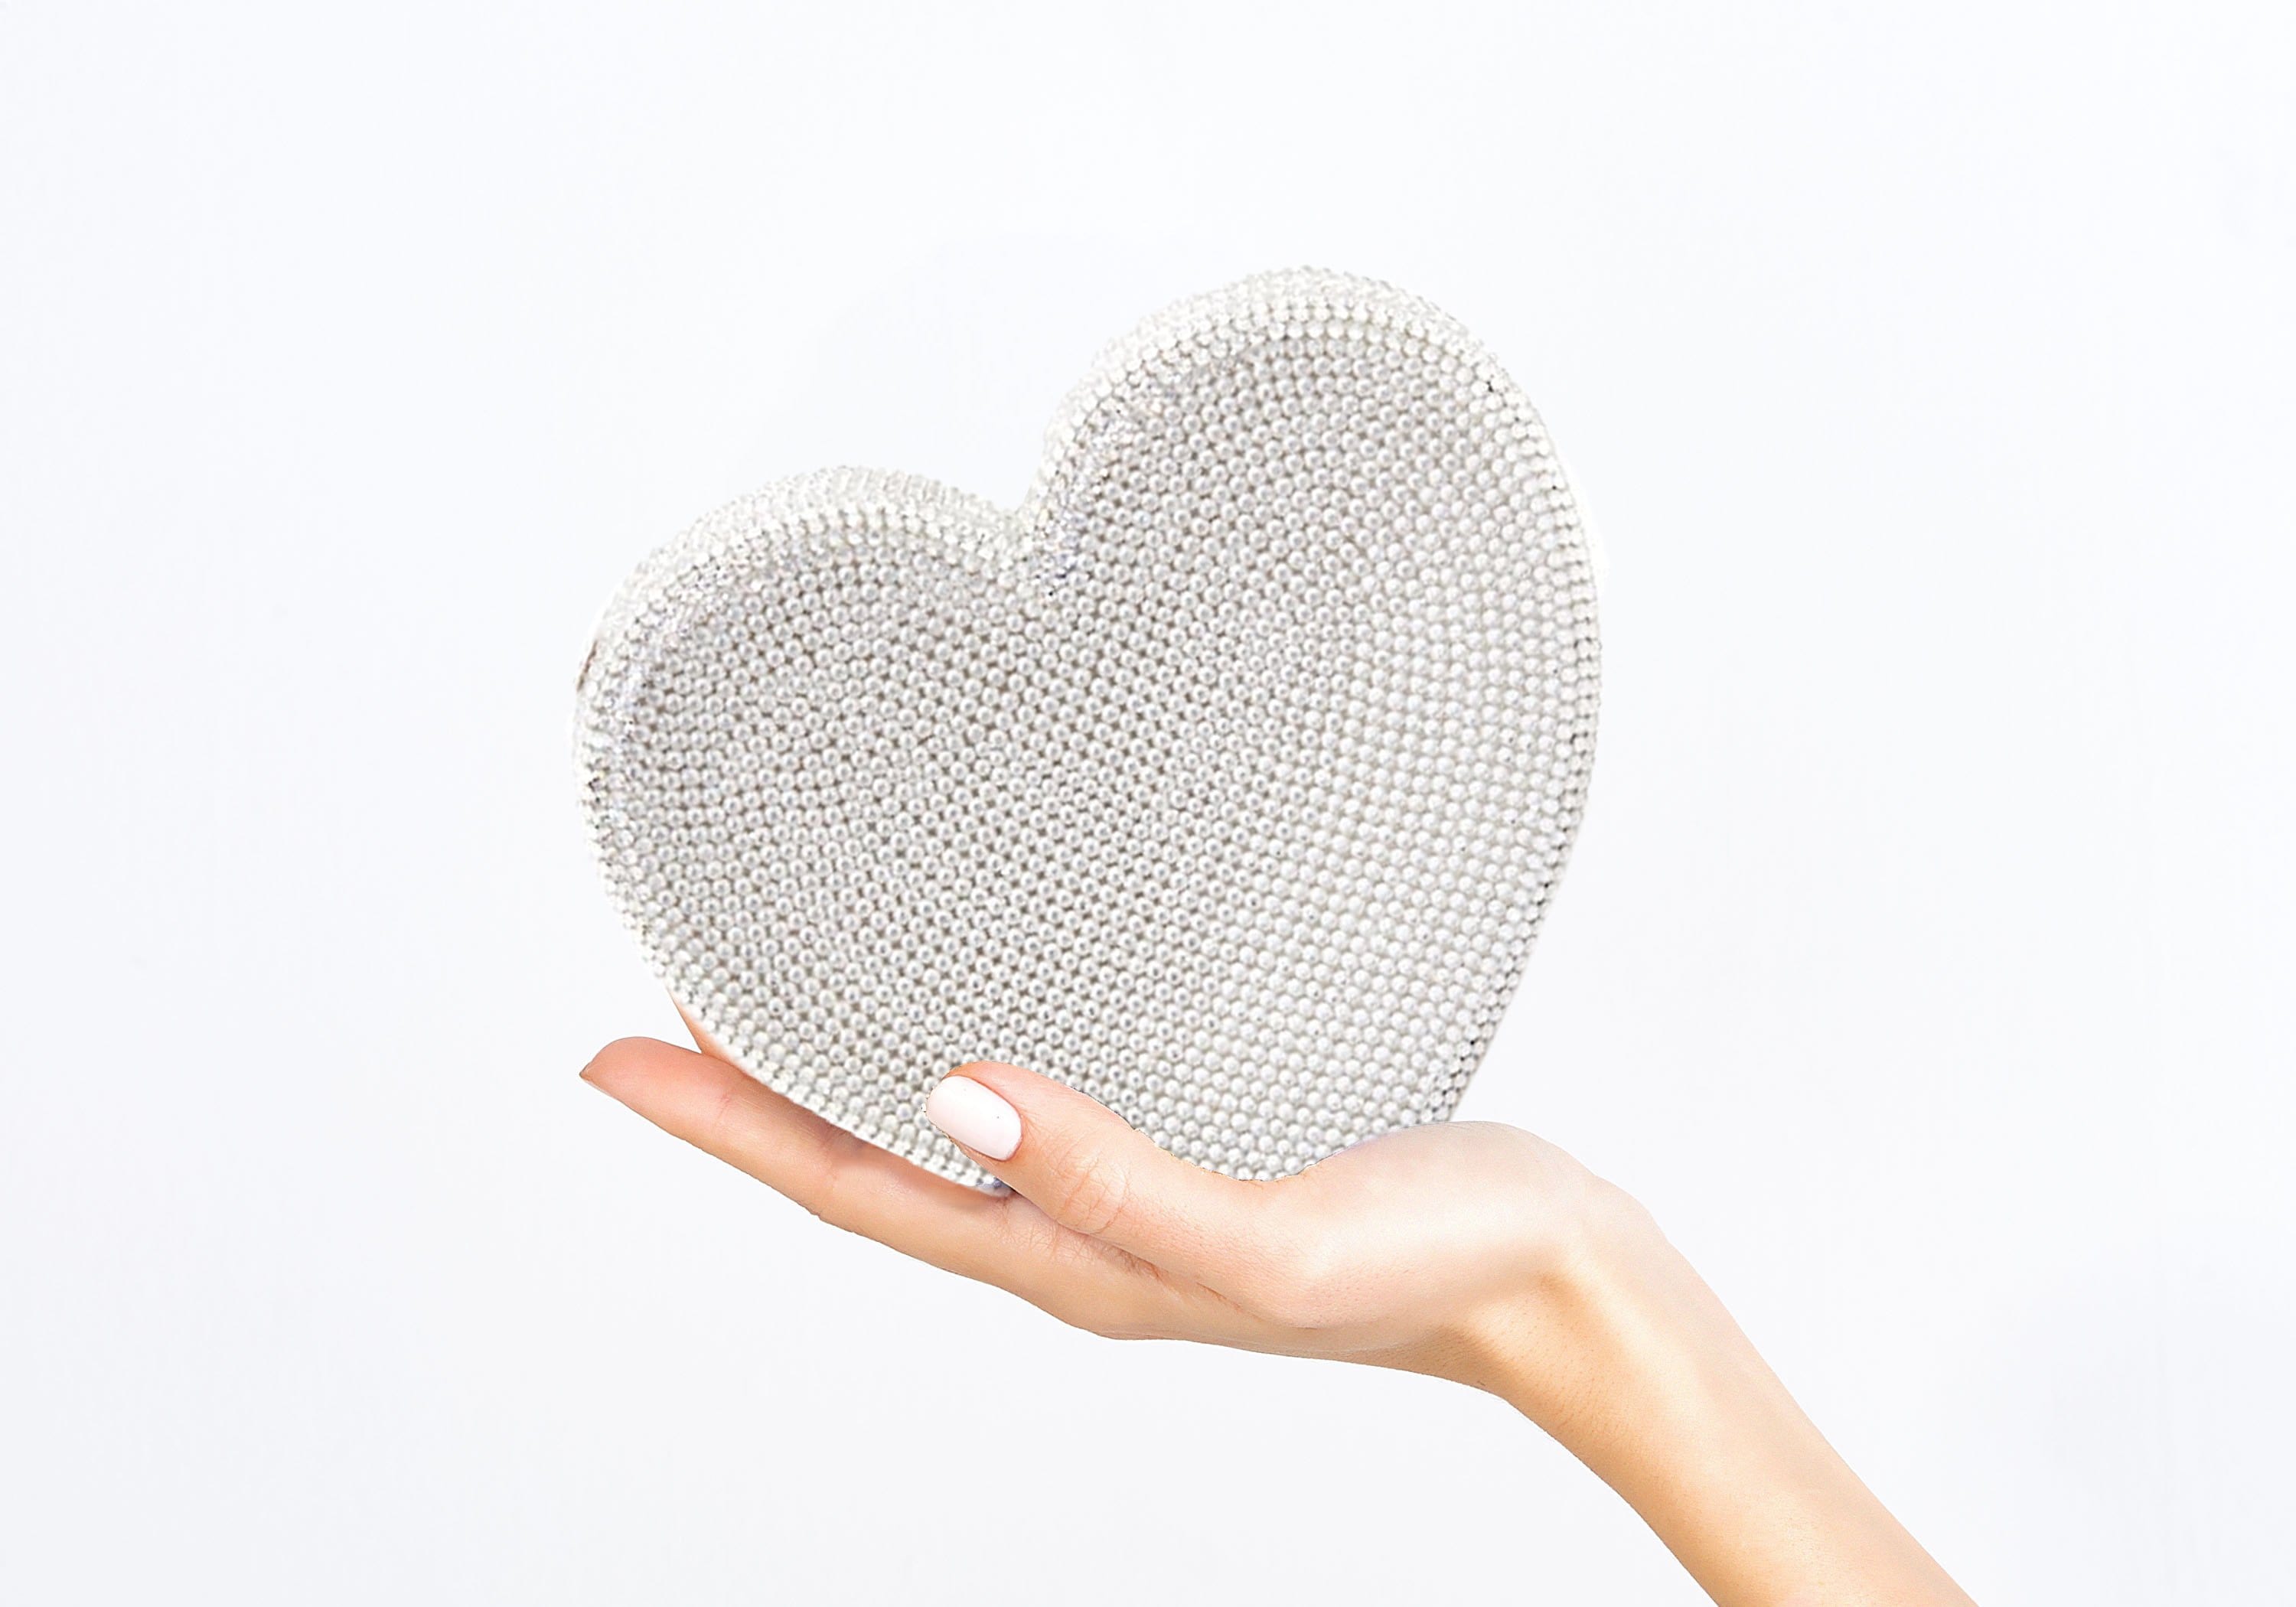 Judith Leiber Couture Lamour Petite Coeur Heart Clutch in Silver Rhine